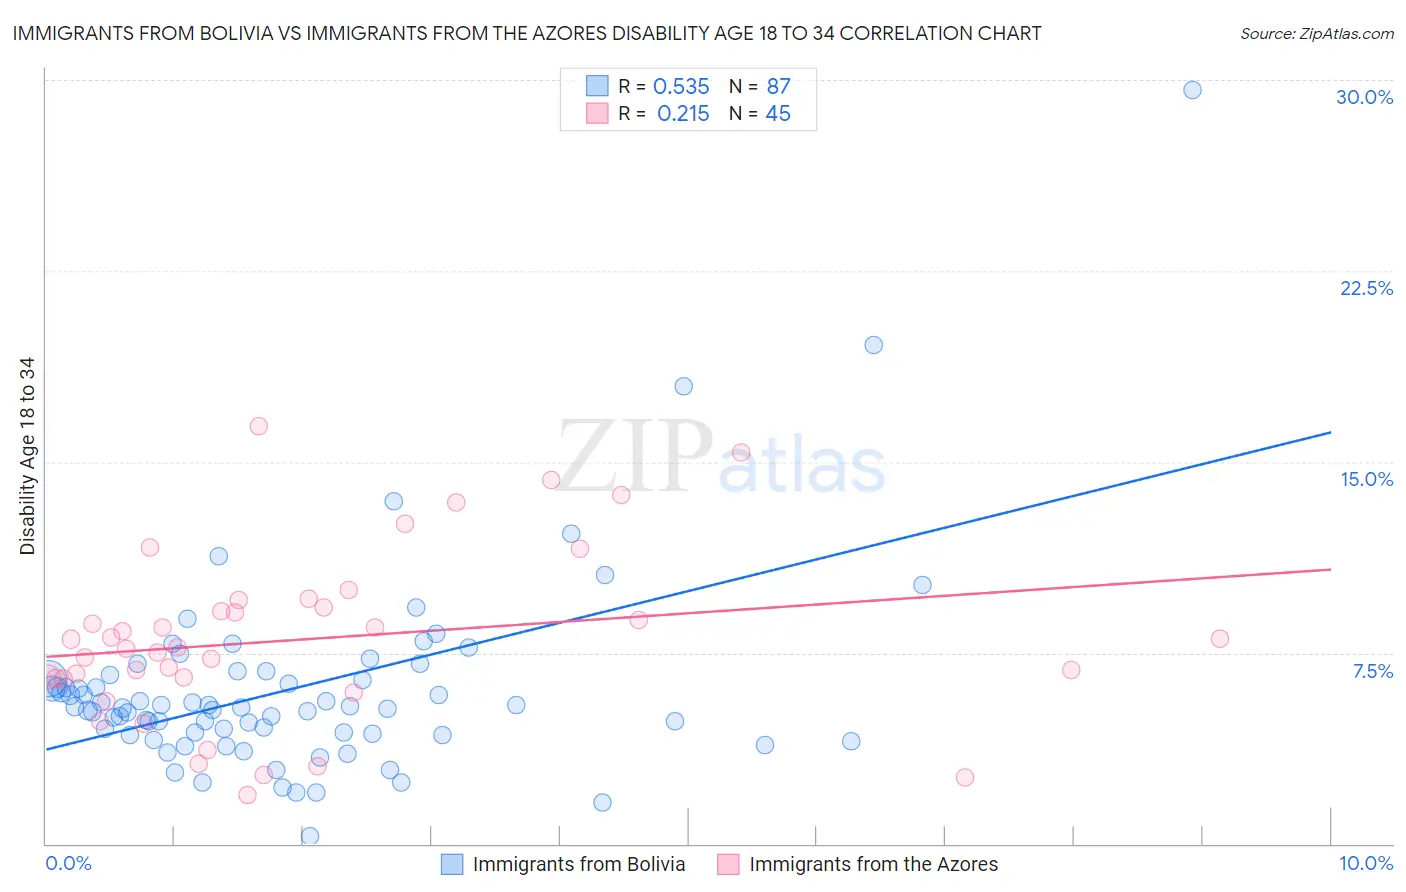 Immigrants from Bolivia vs Immigrants from the Azores Disability Age 18 to 34